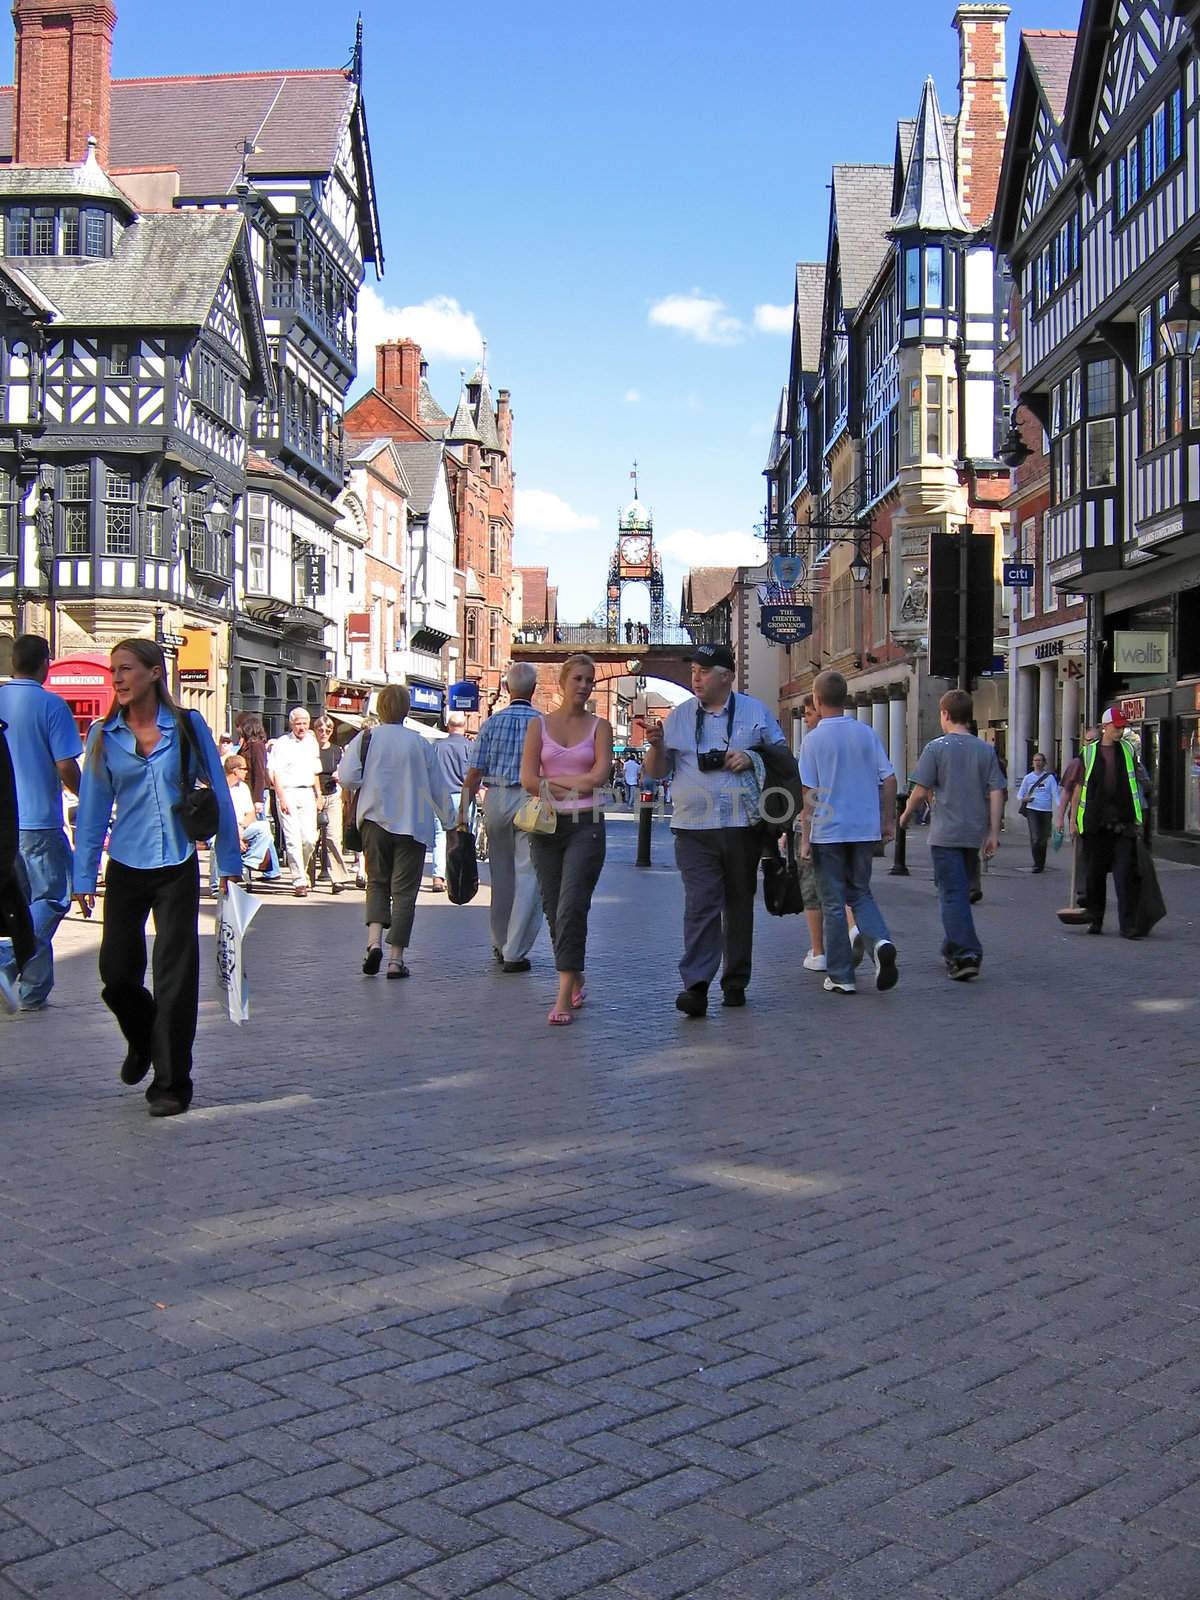 Tourists Shopping in Chester UK by green308